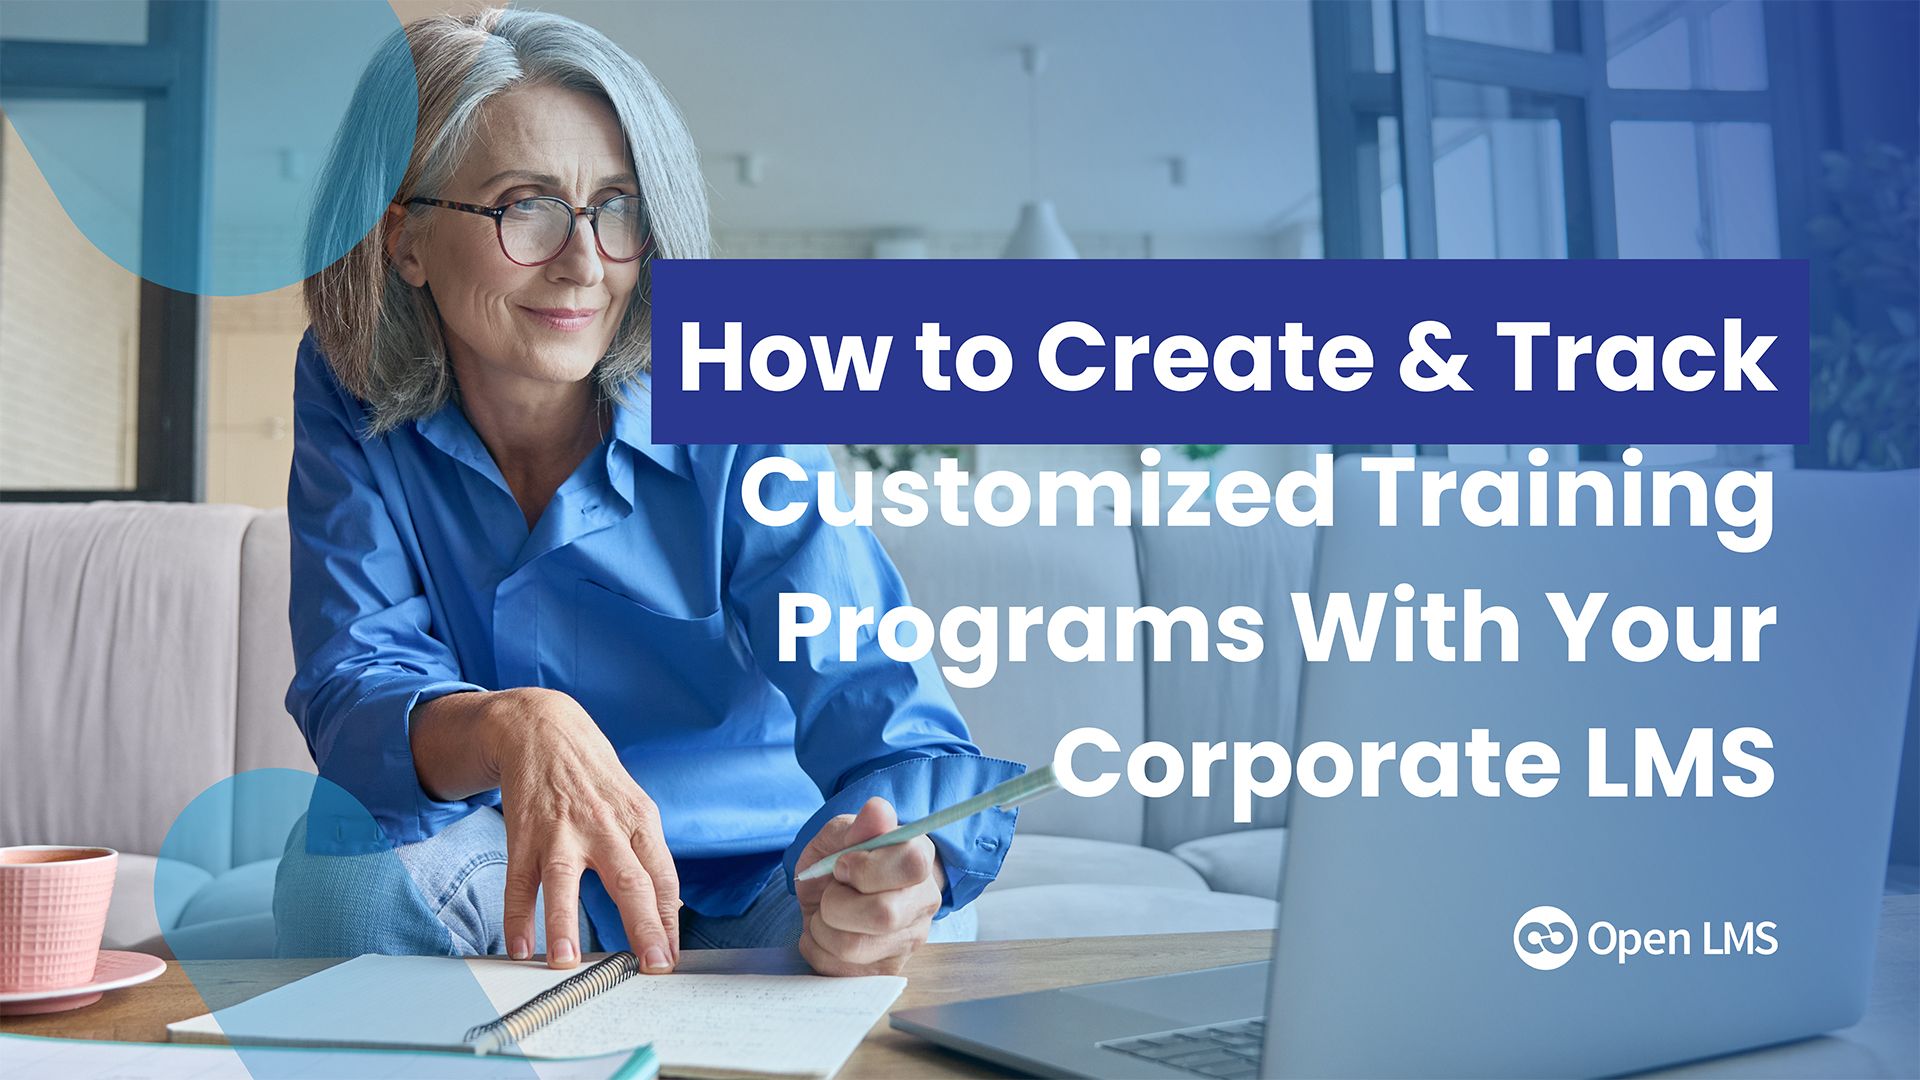 How to Create & Track Customized Training Programs With Your Corporate LMS